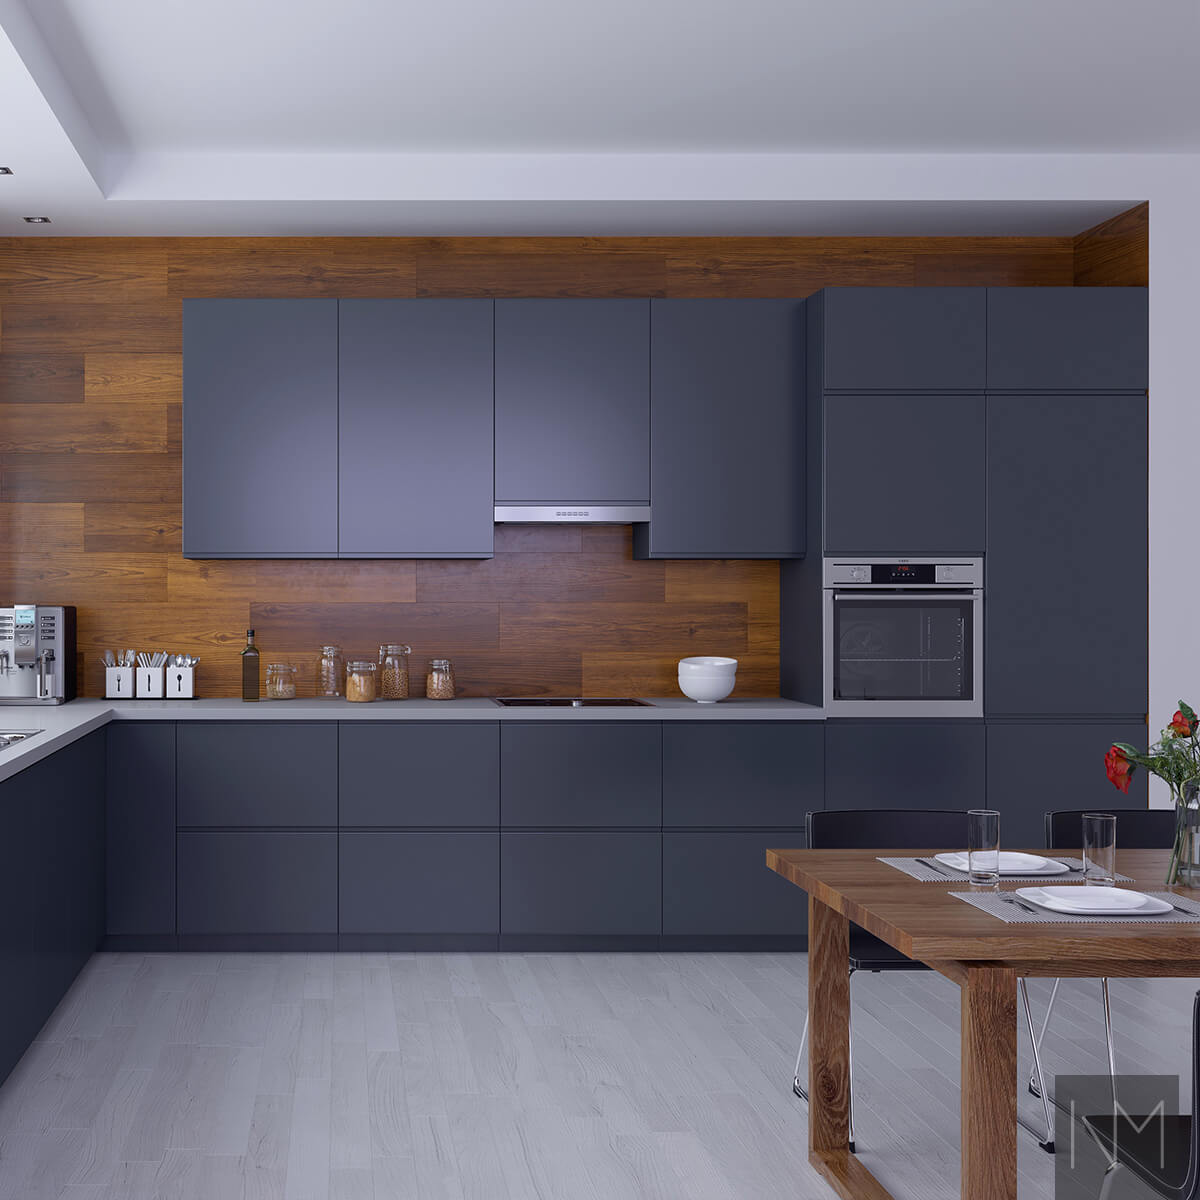 Cucina IKEA Metod o Faktum Instyle. Colore NCS S8105-R94B o Jotun Sophisticated Blue 4744